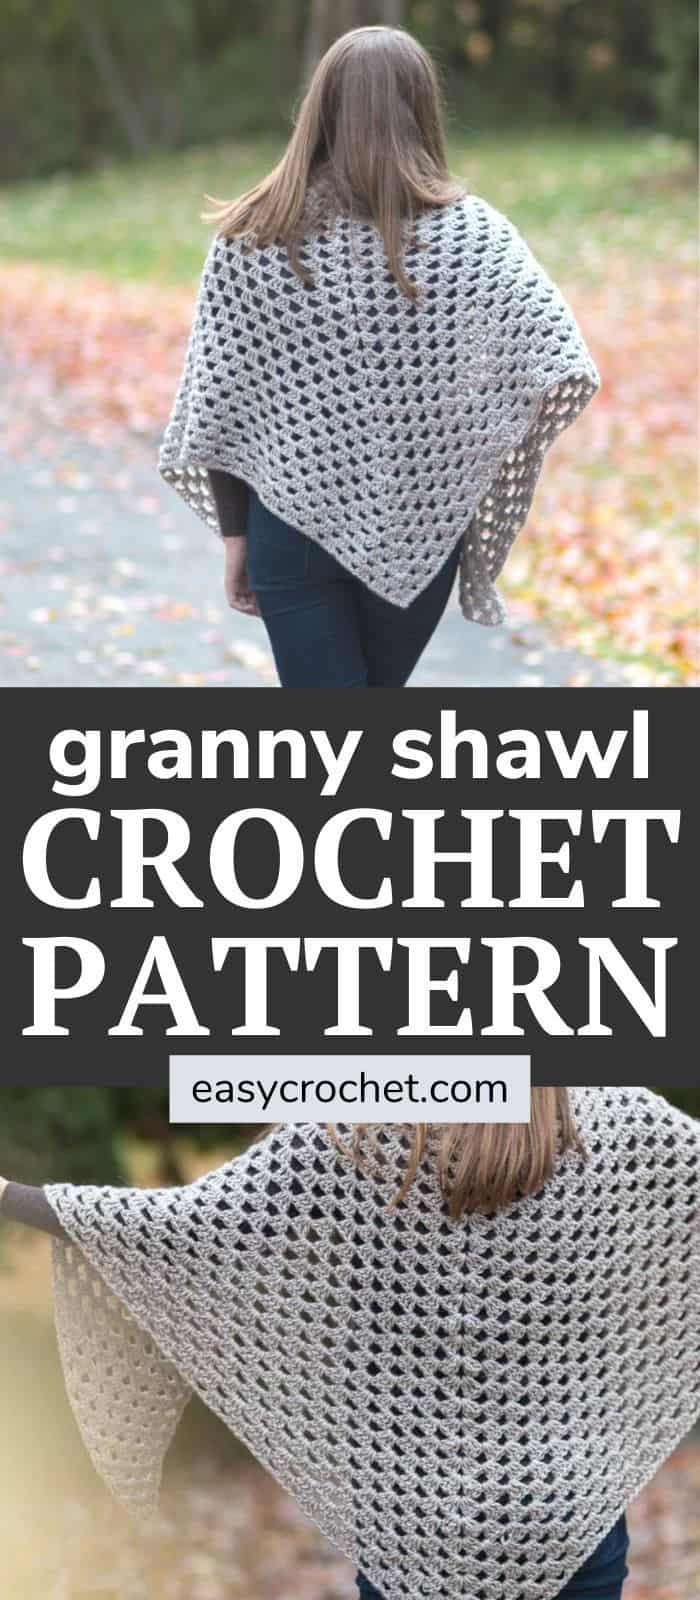 Free Crochet Granny Shawl Crochet Pattern by easycrochet.com Learn how to make this simple shawl with a video and written pattern. via @easycrochetcom